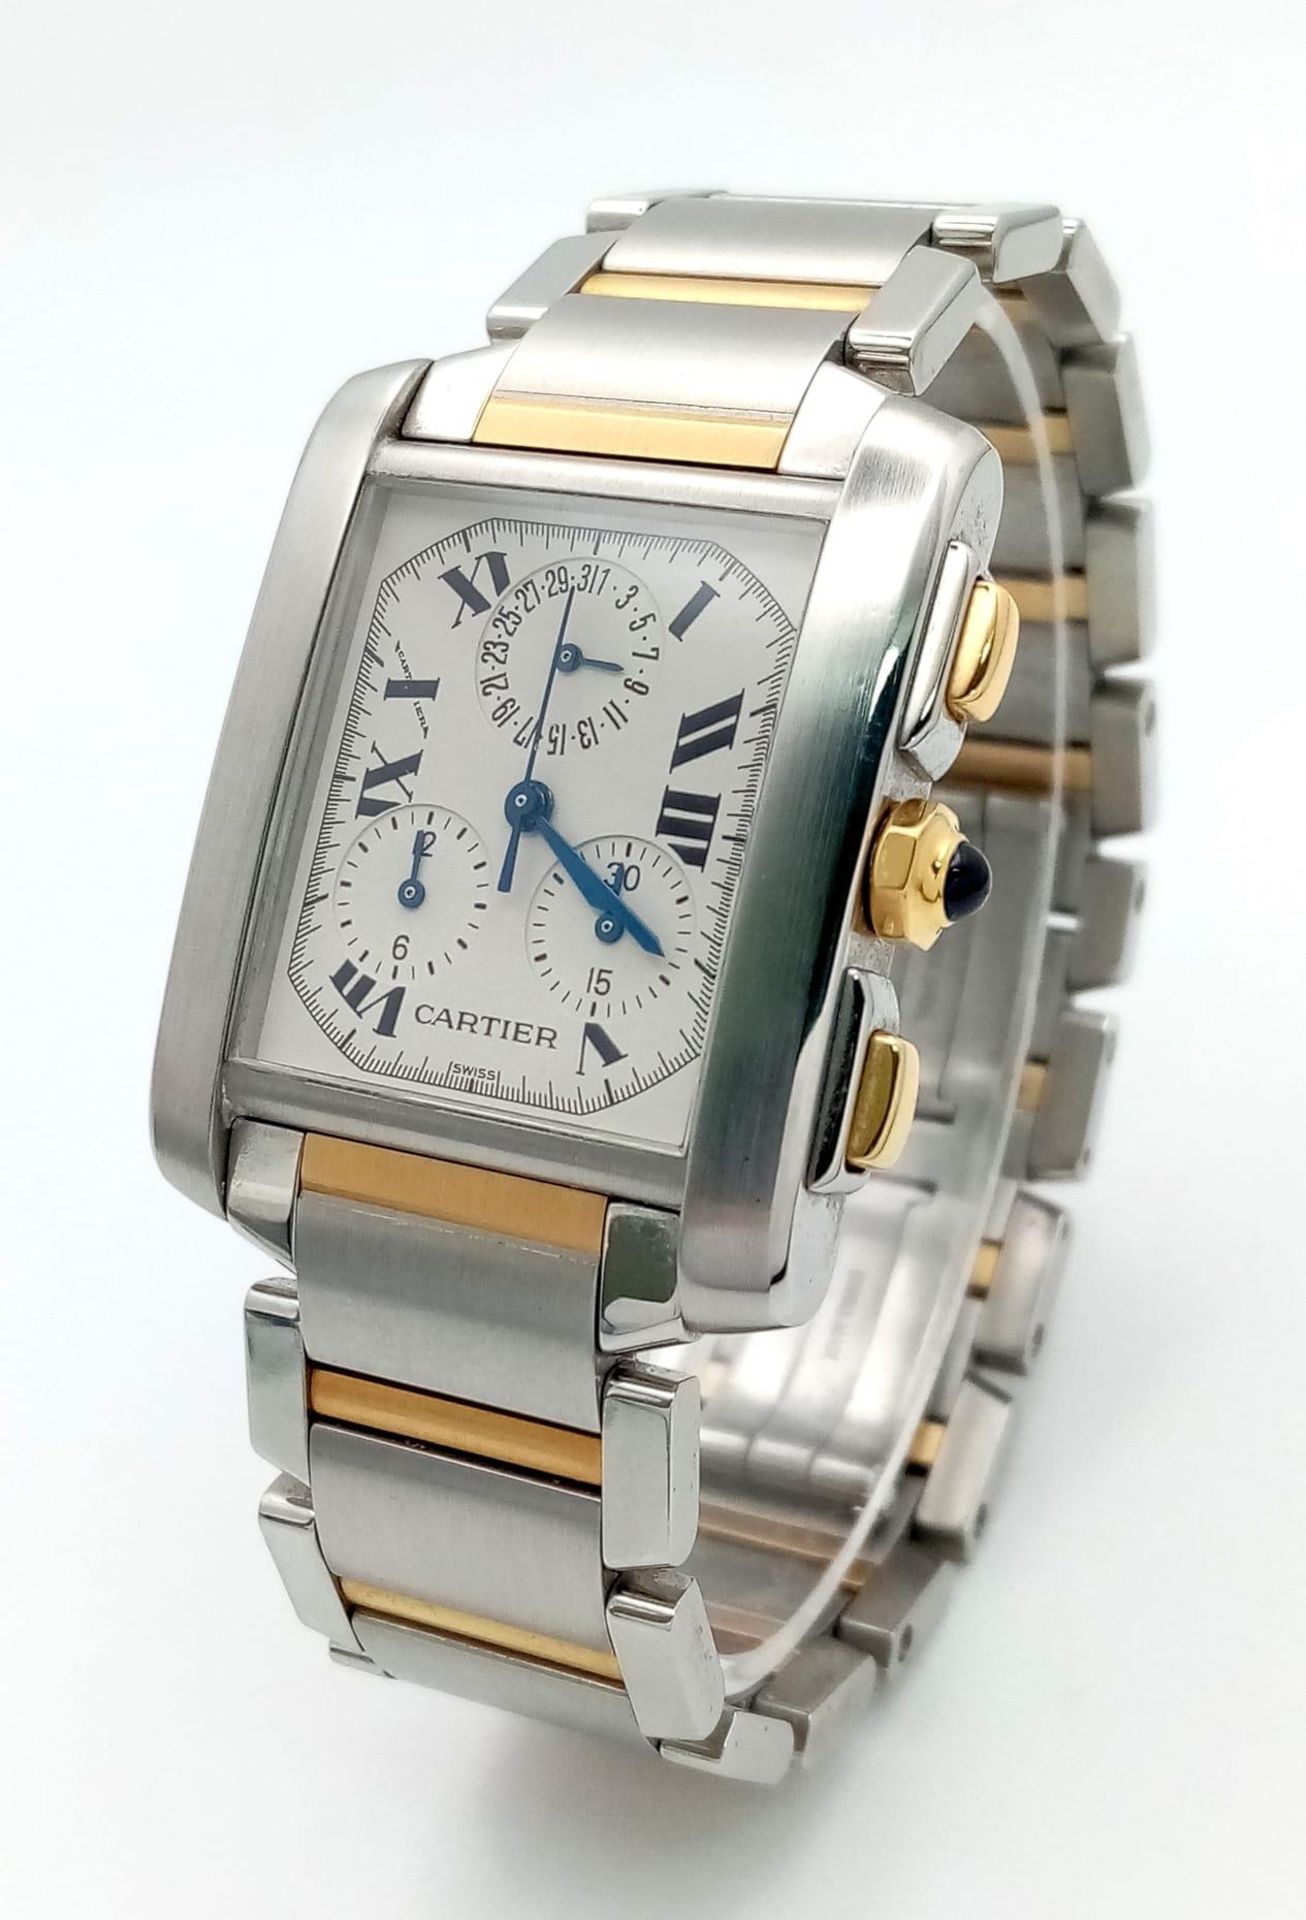 A Cartier Tank Francaise Bi-Metal Quartz Chronograph Gents Watch. 18k gold and stainless steel